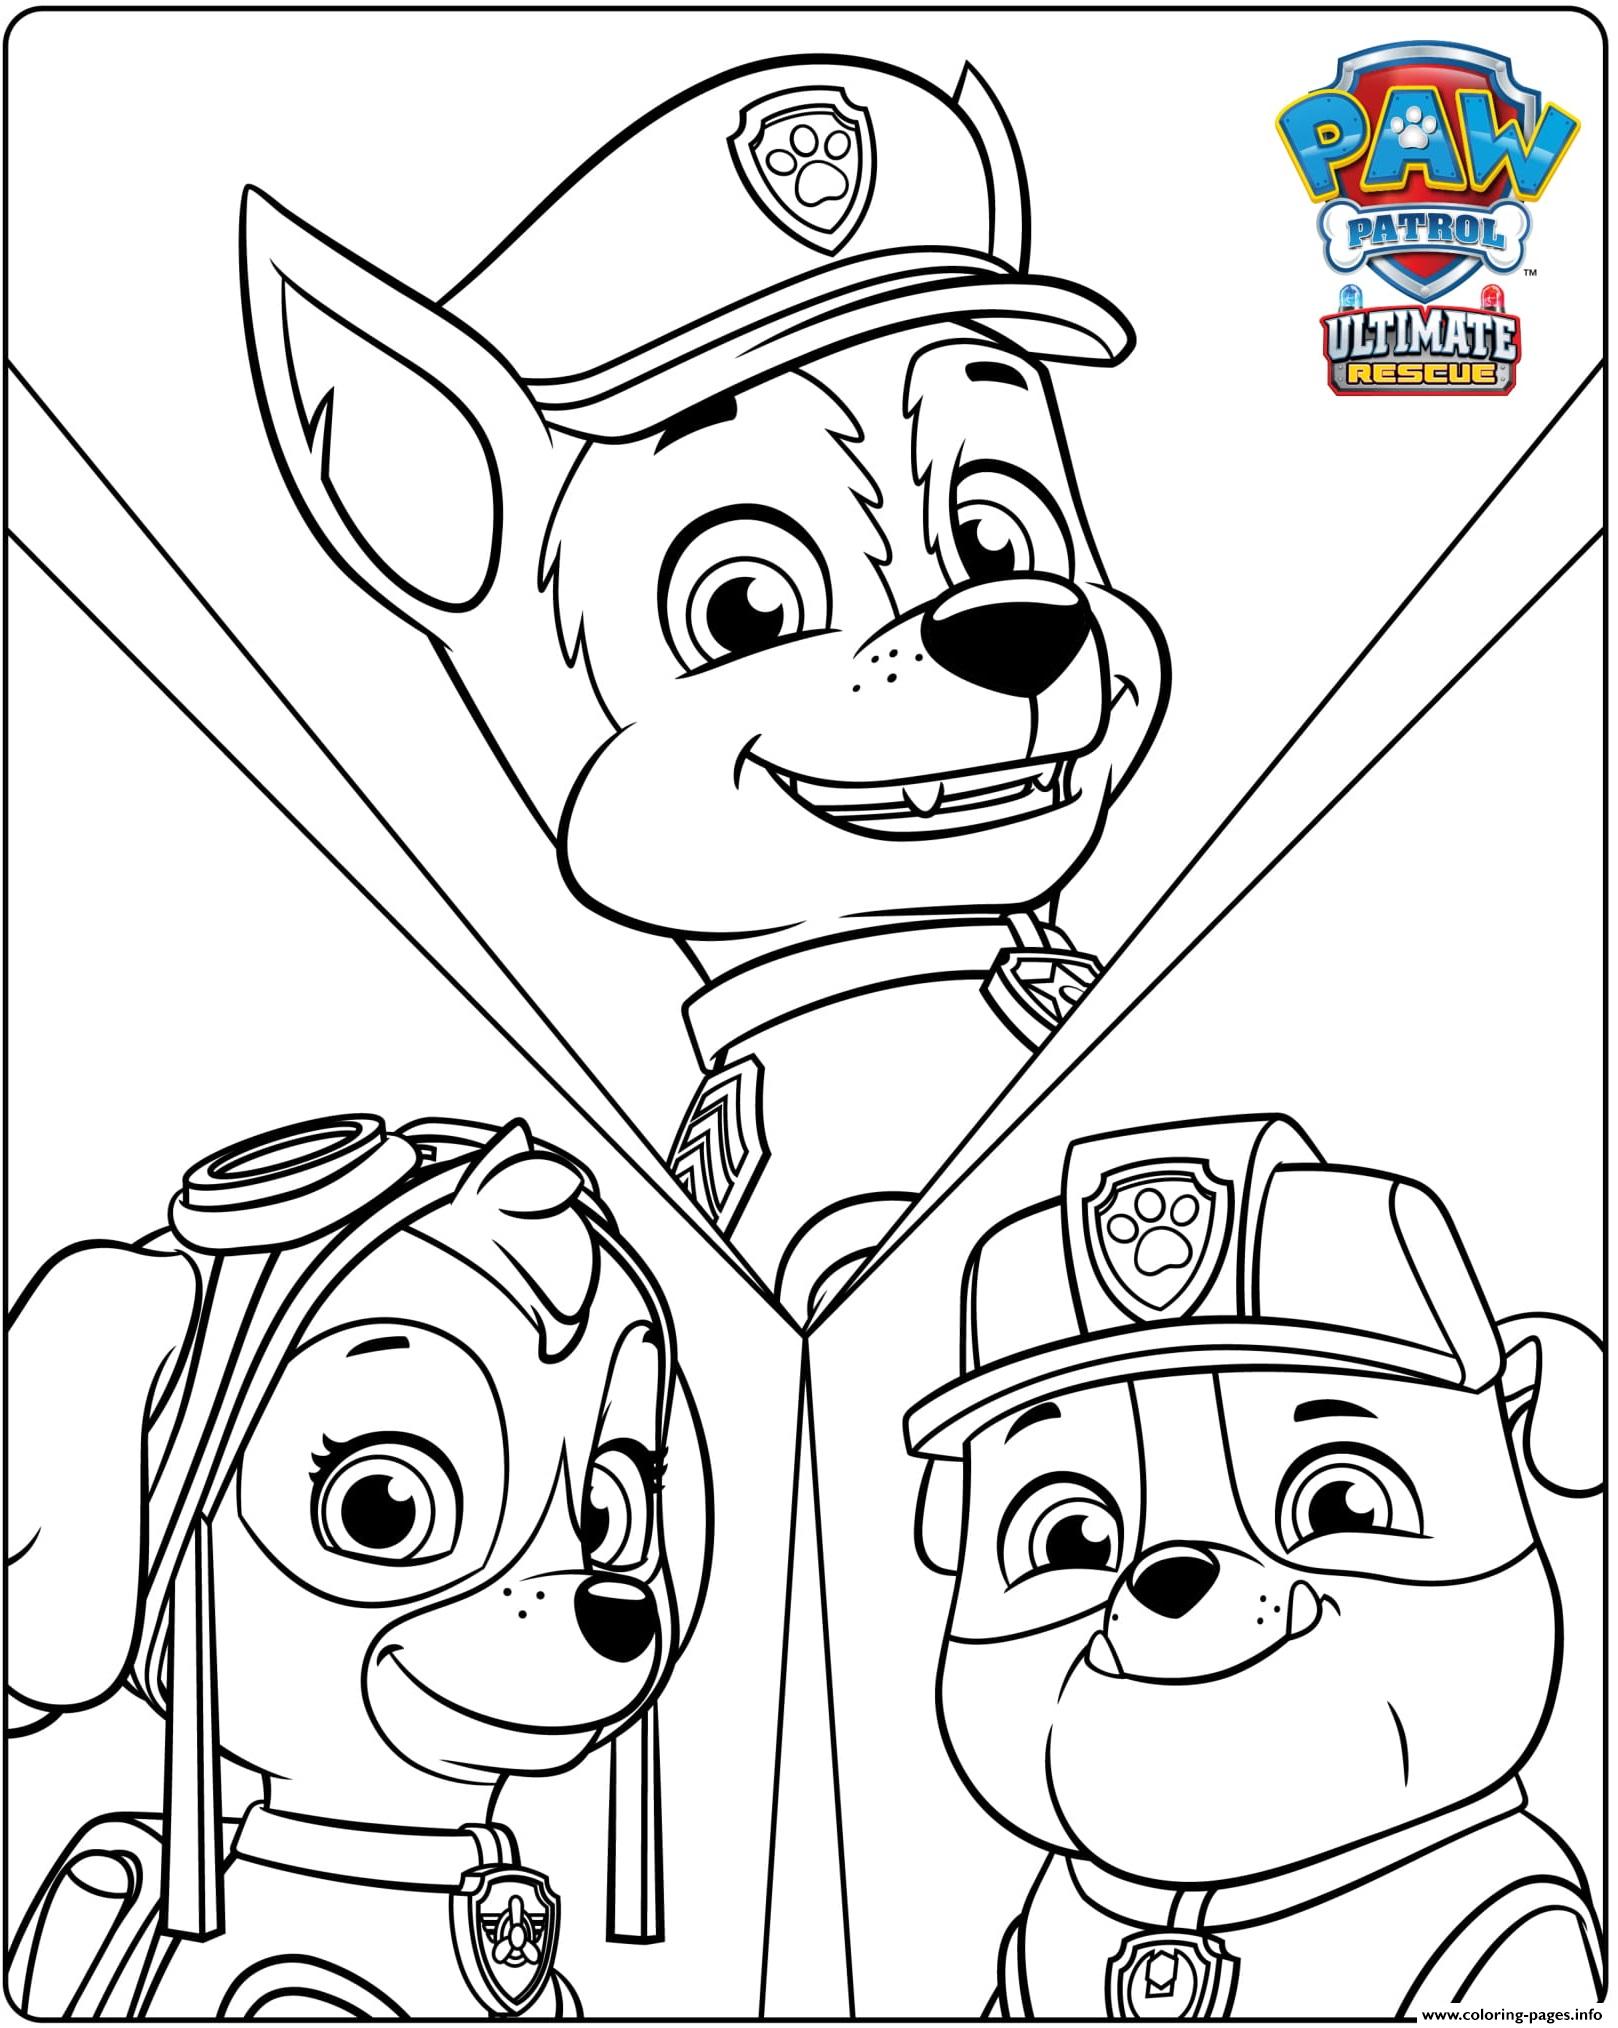 Coloring Pages : Chase Paw Patrol Coloring Page Ultimate ...